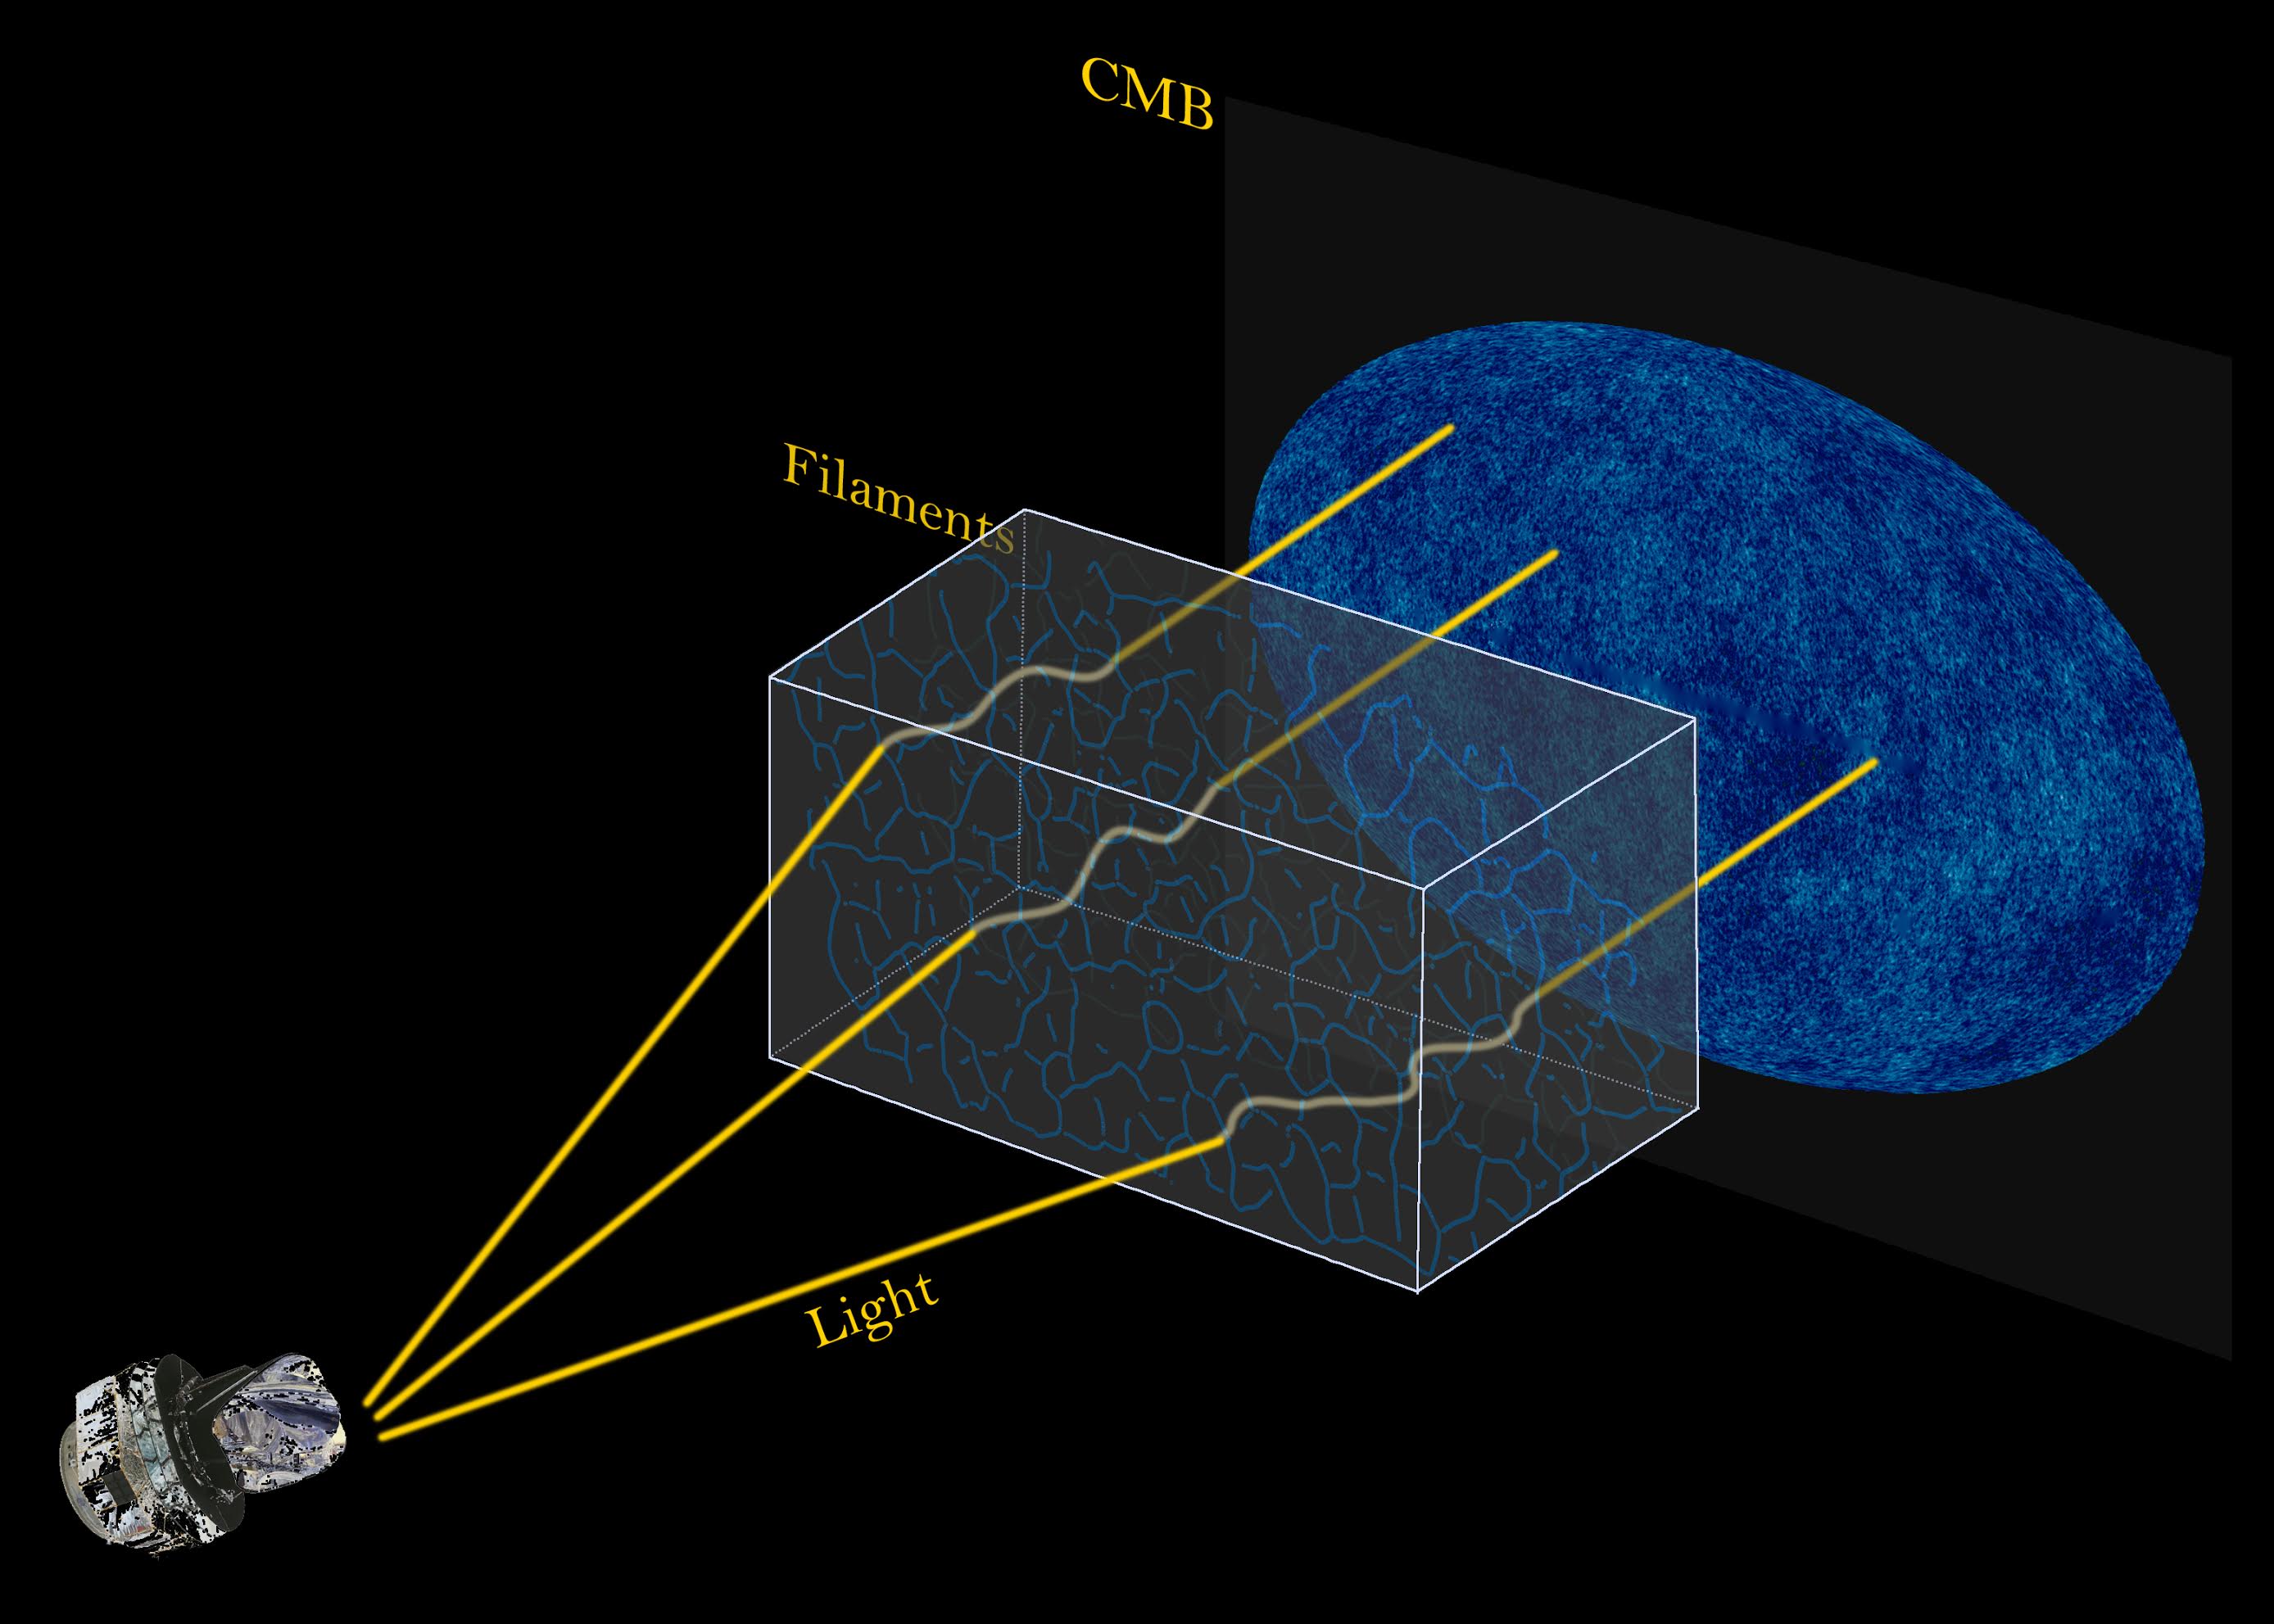 Illustration - In this illustration, the trajectory of cosmic microwave background light is bent by structures known as filaments that are invisible to our eyes, creating an effect known as weak lensing captured by the Planck satellite (left), a space observatory. Researchers used computers to study the weak lensing signals and produce a map of these filaments, which typically span hundreds of light years in length. (Credit: Siyu He, Shadab Alam, Wei Chen, and Planck/ESA)